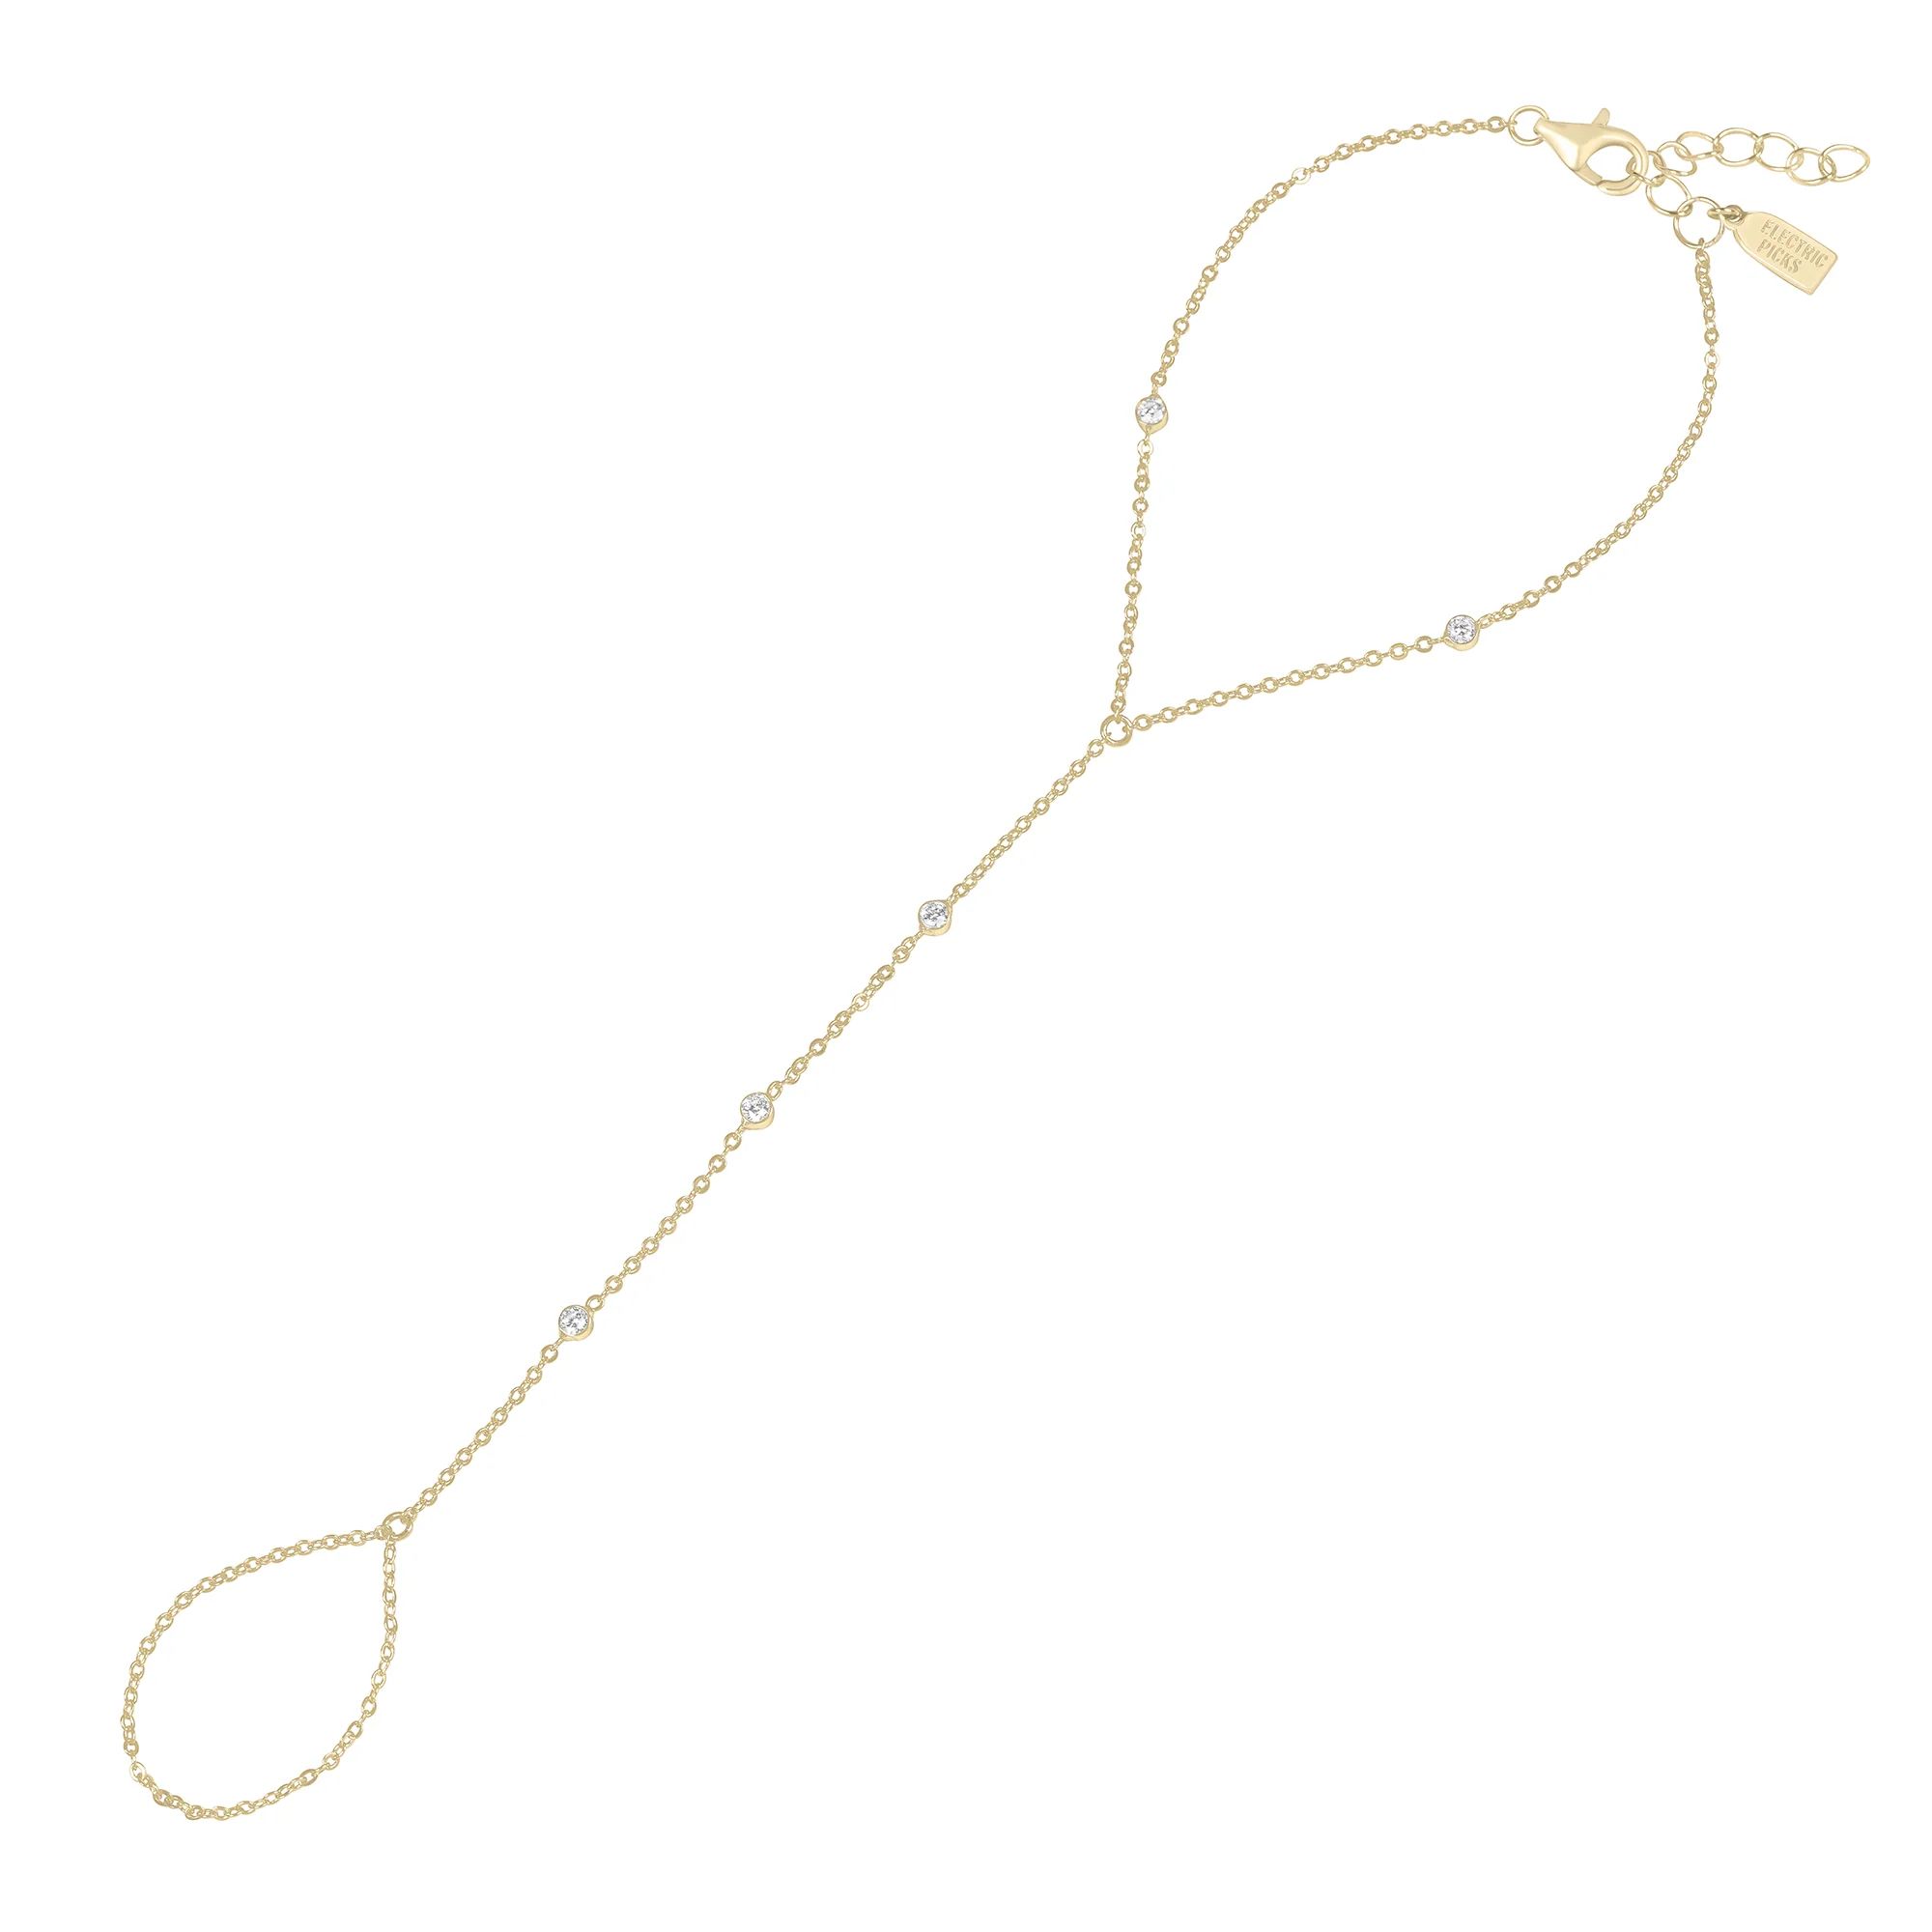 Starlet Hand Chain | Electric Picks Jewelry